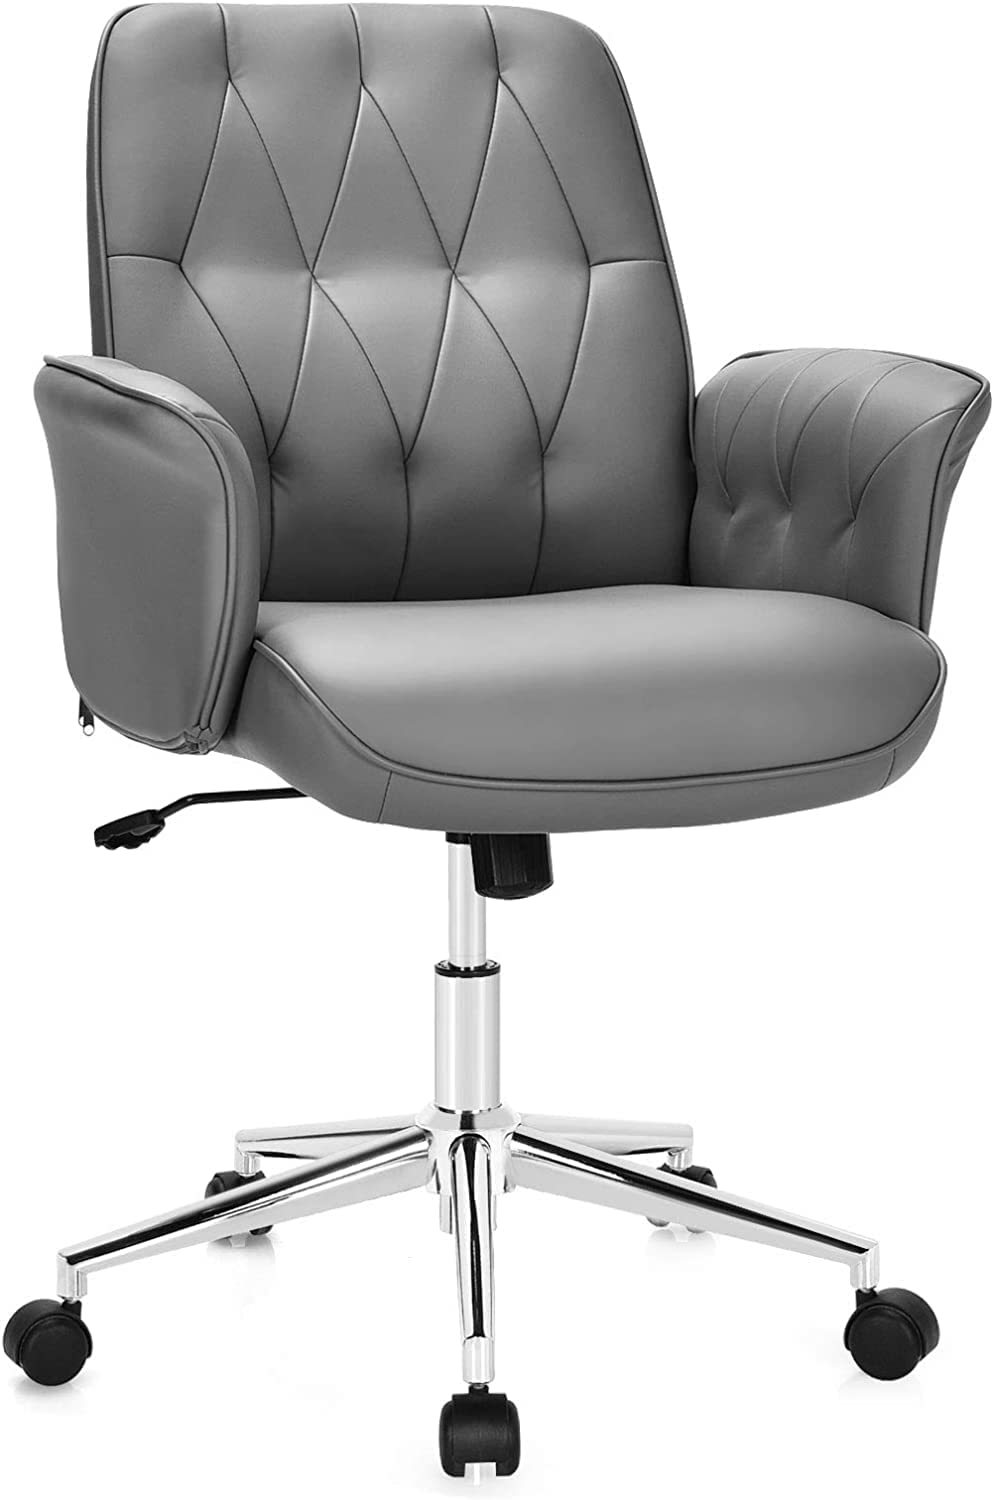 Primary image for Generic Pu Leather, Height Adjustable Armchair W/Universal Wheels, Rocking, Grey